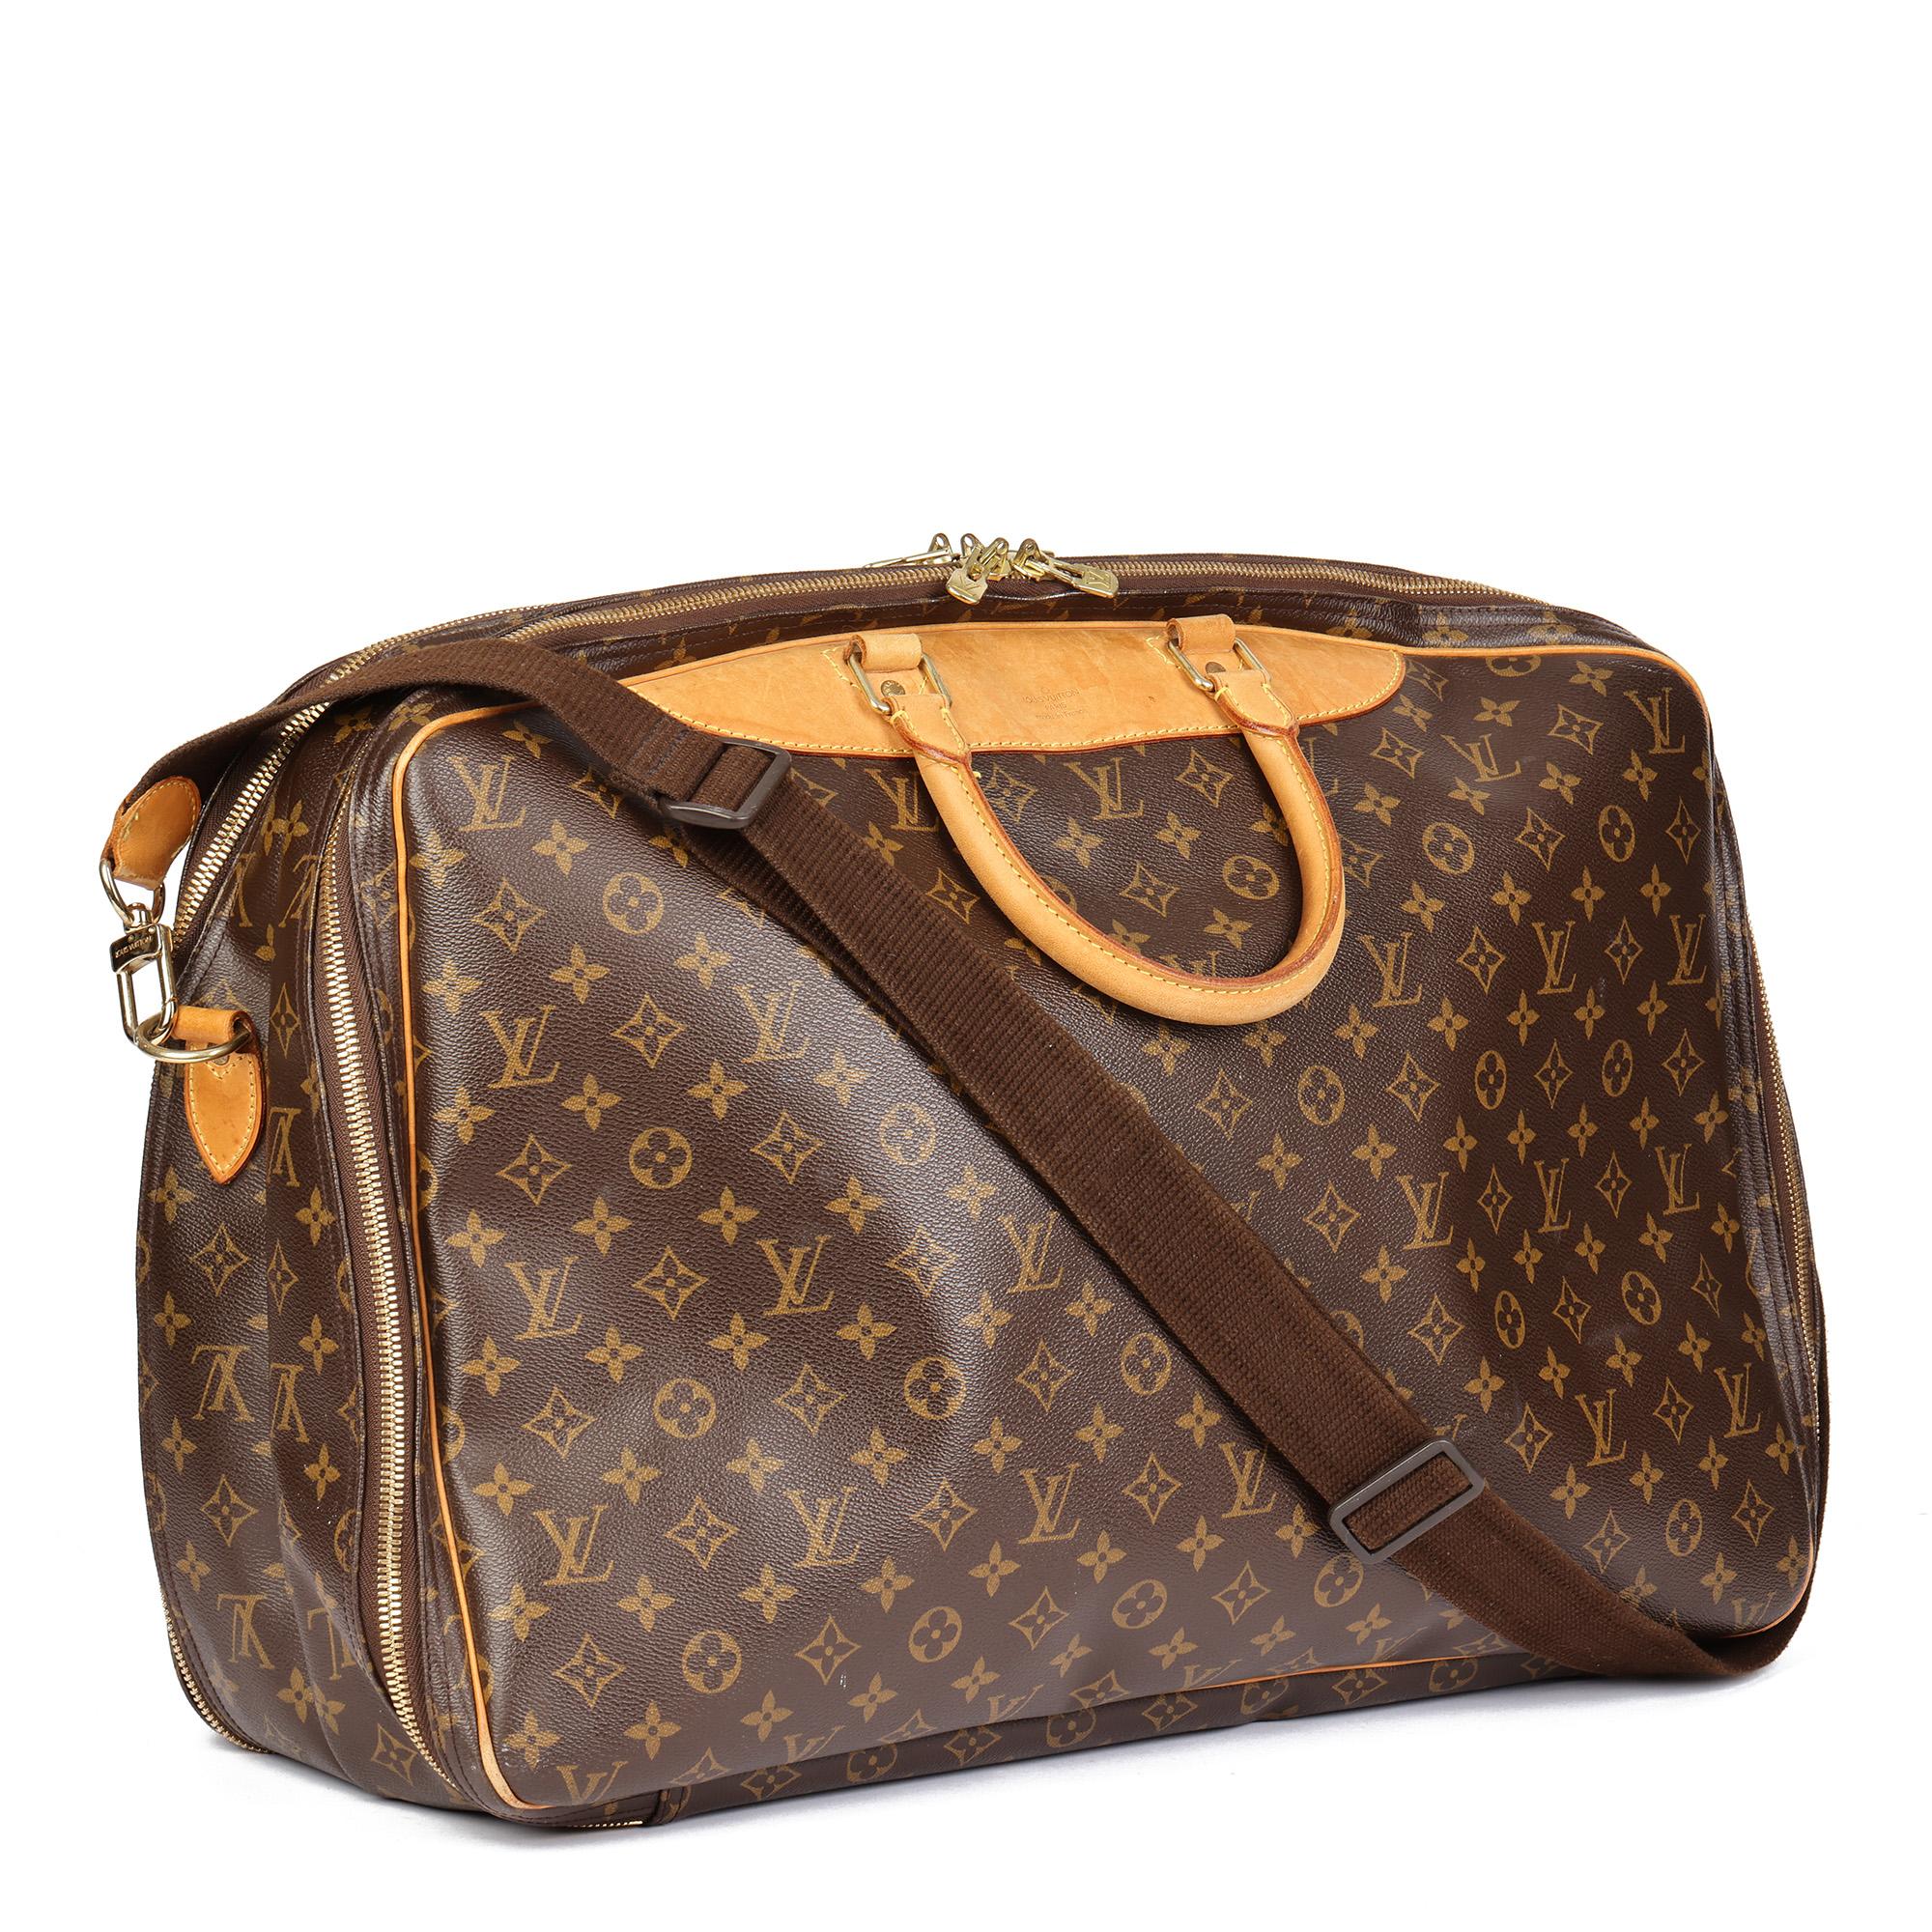 LOUIS VUITTON
Brown Monogram Coated Canvas & Vachetta Leather Alize 55

Xupes Reference: CB706
Serial Number: MB2097
Age (Circa): 2007
Authenticity Details: Date Stamp (Made in France)
Gender: Ladies
Type: Travel

Colour: Brown
Hardware: Golden